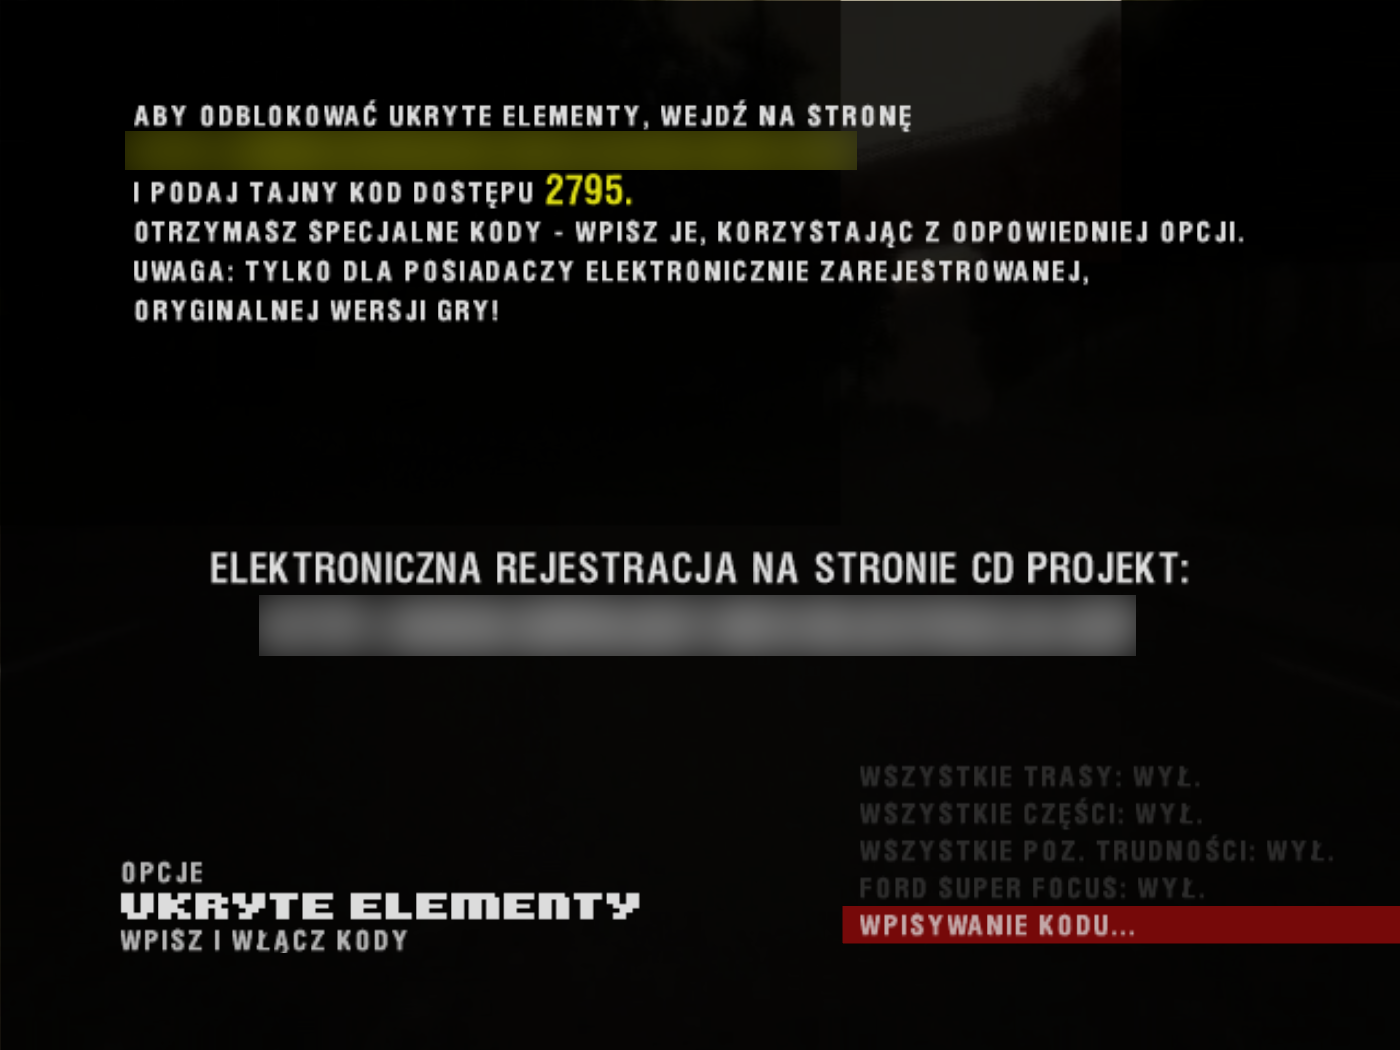 The "secrets" menu splash screen from the Polish edition of the game.